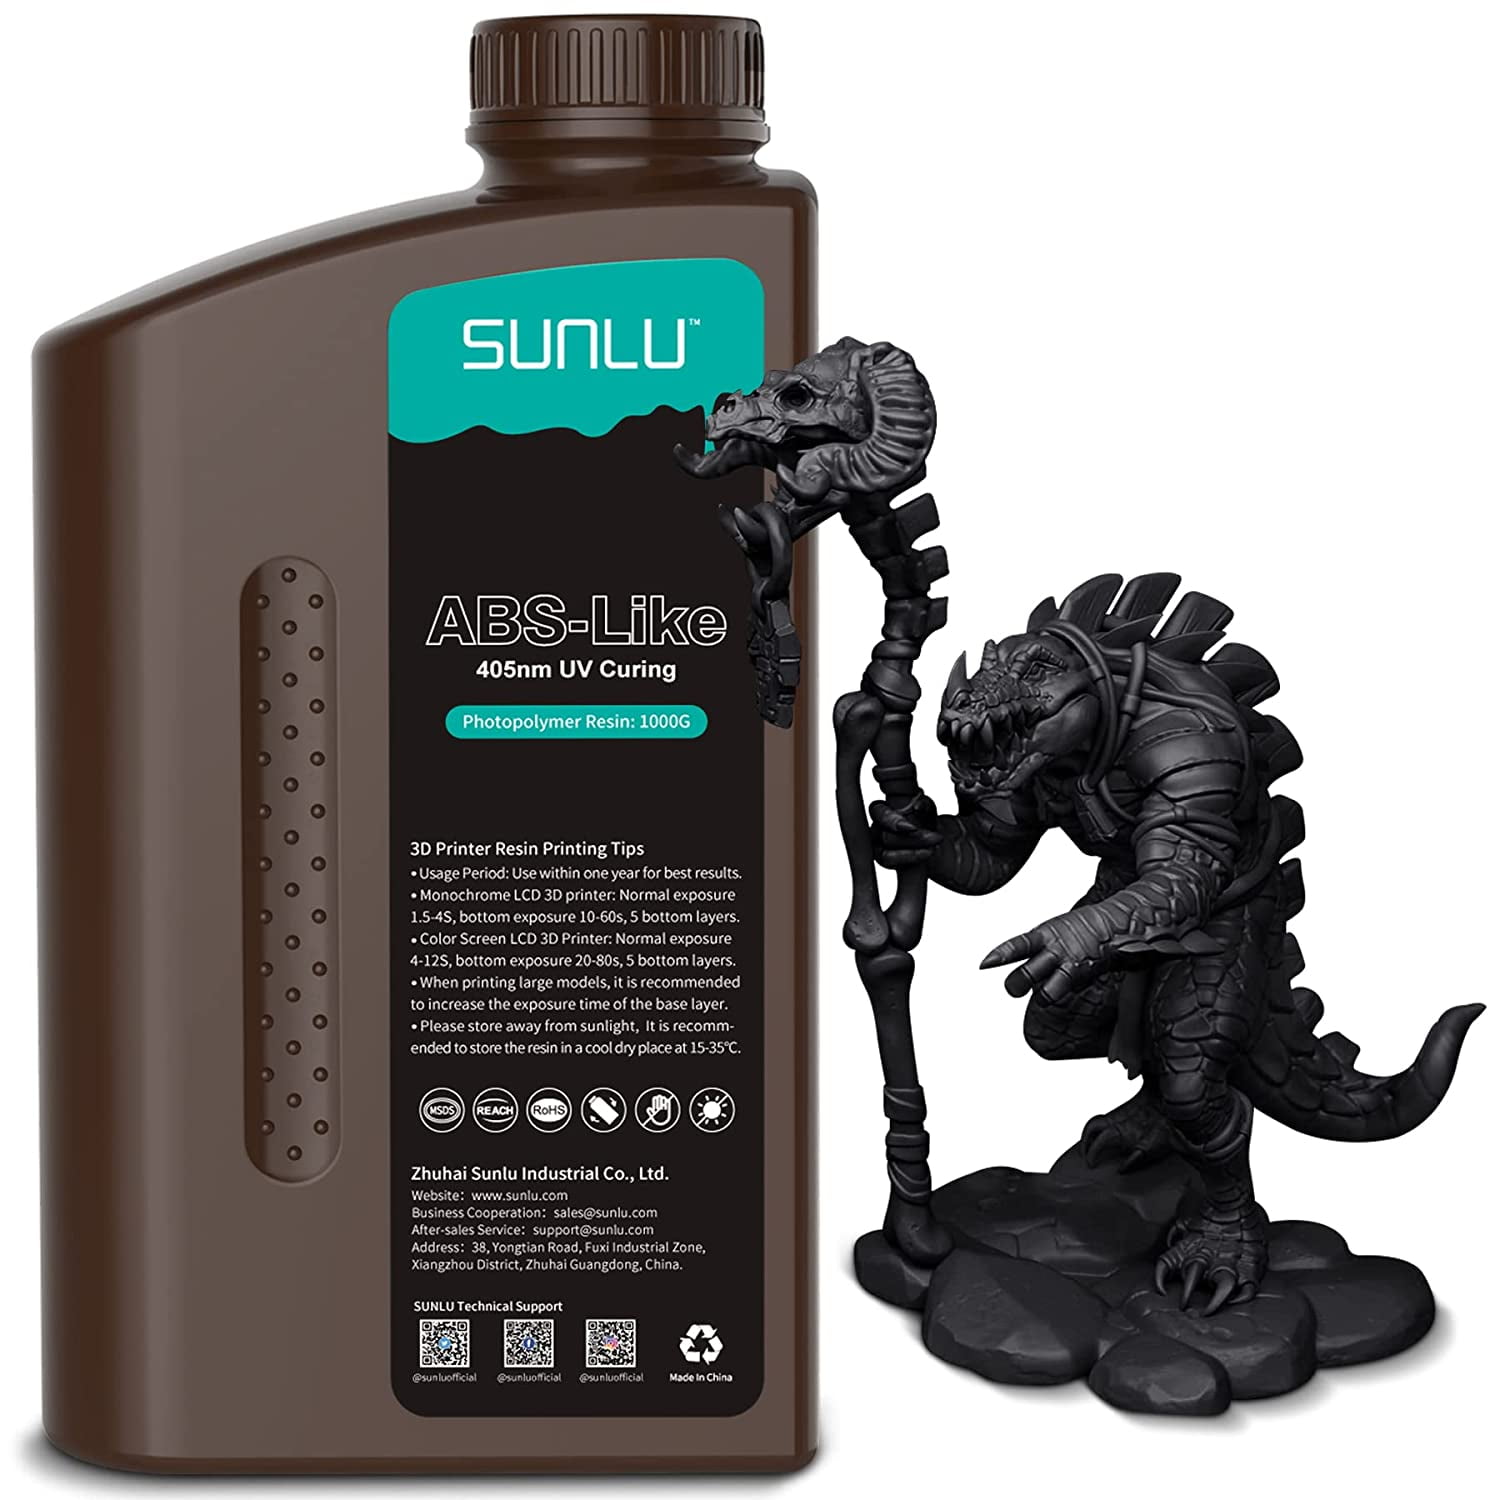 SUNLU 1KG ABS-Like 3D Printer Resin, Fast Curing Strong 405nm Photopolymer  Resin for LCD/DLP/SLA 3D Printer, Non Brittle, High Precision, Low Shrinkage,  Black Resin 